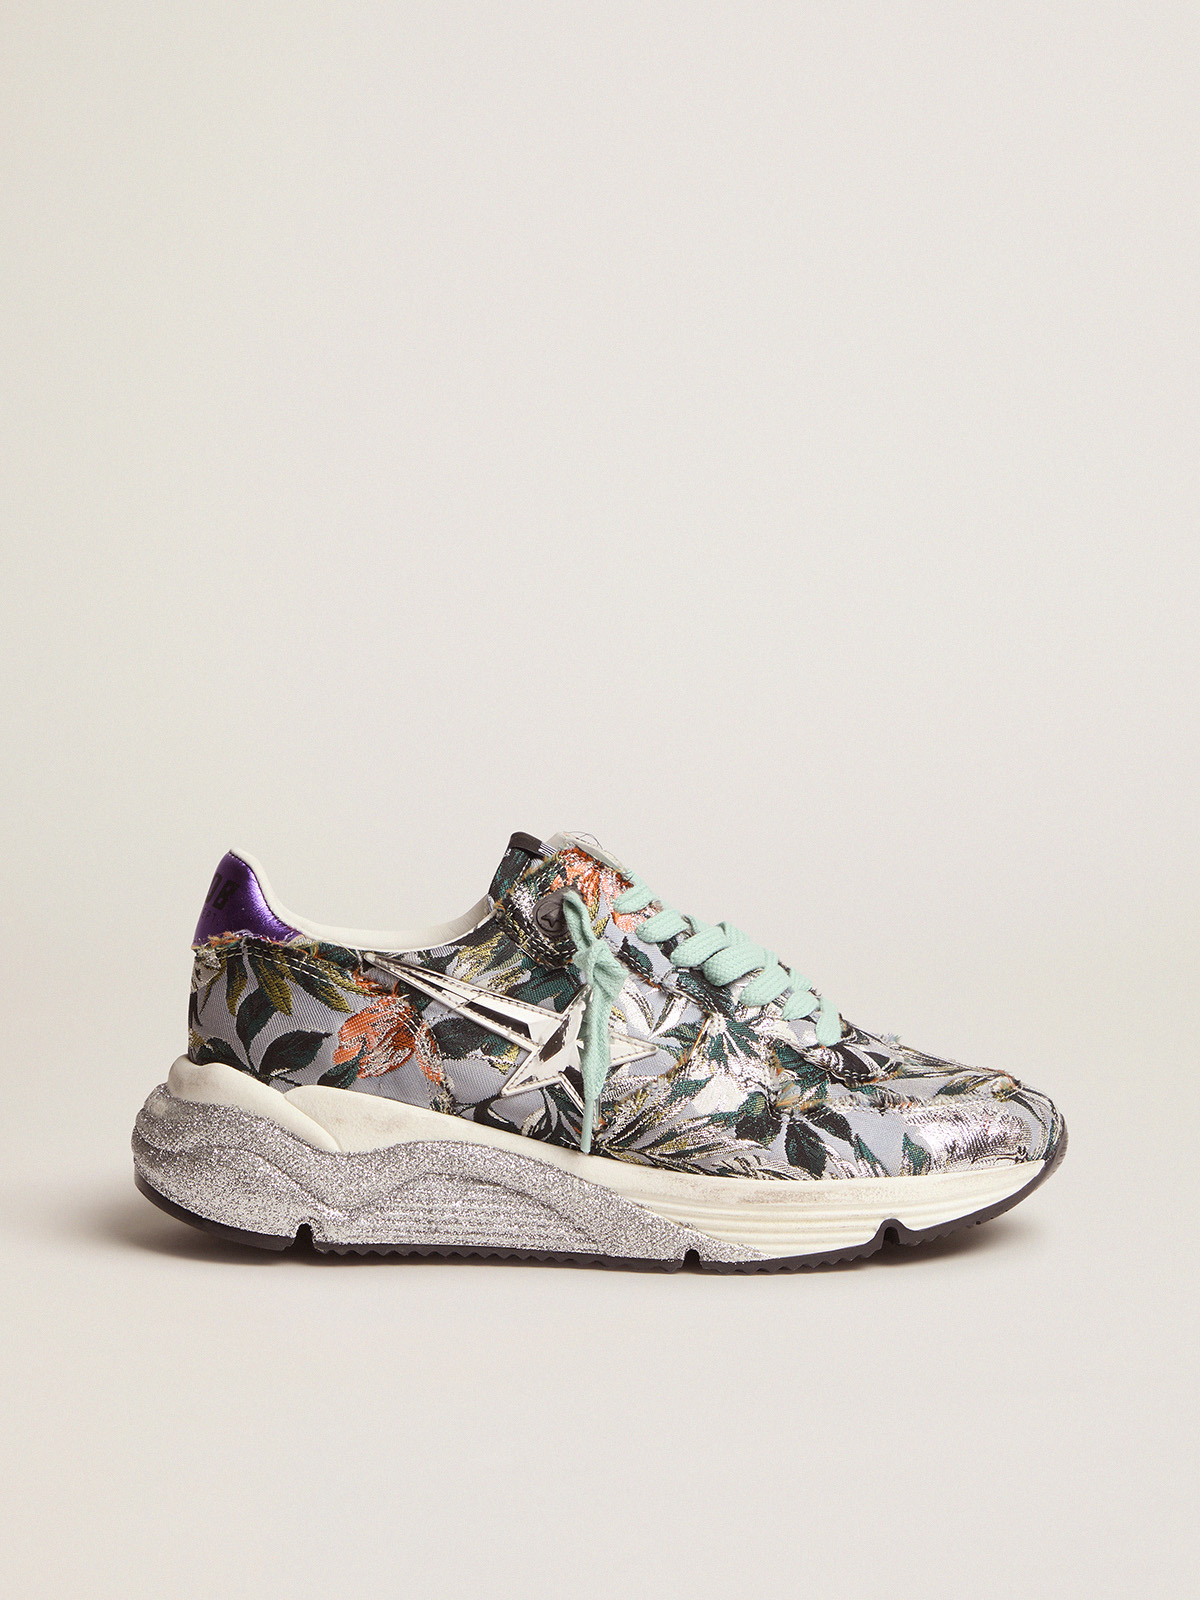 Running Sole sneakers with floral jacquard upper | Golden Goose